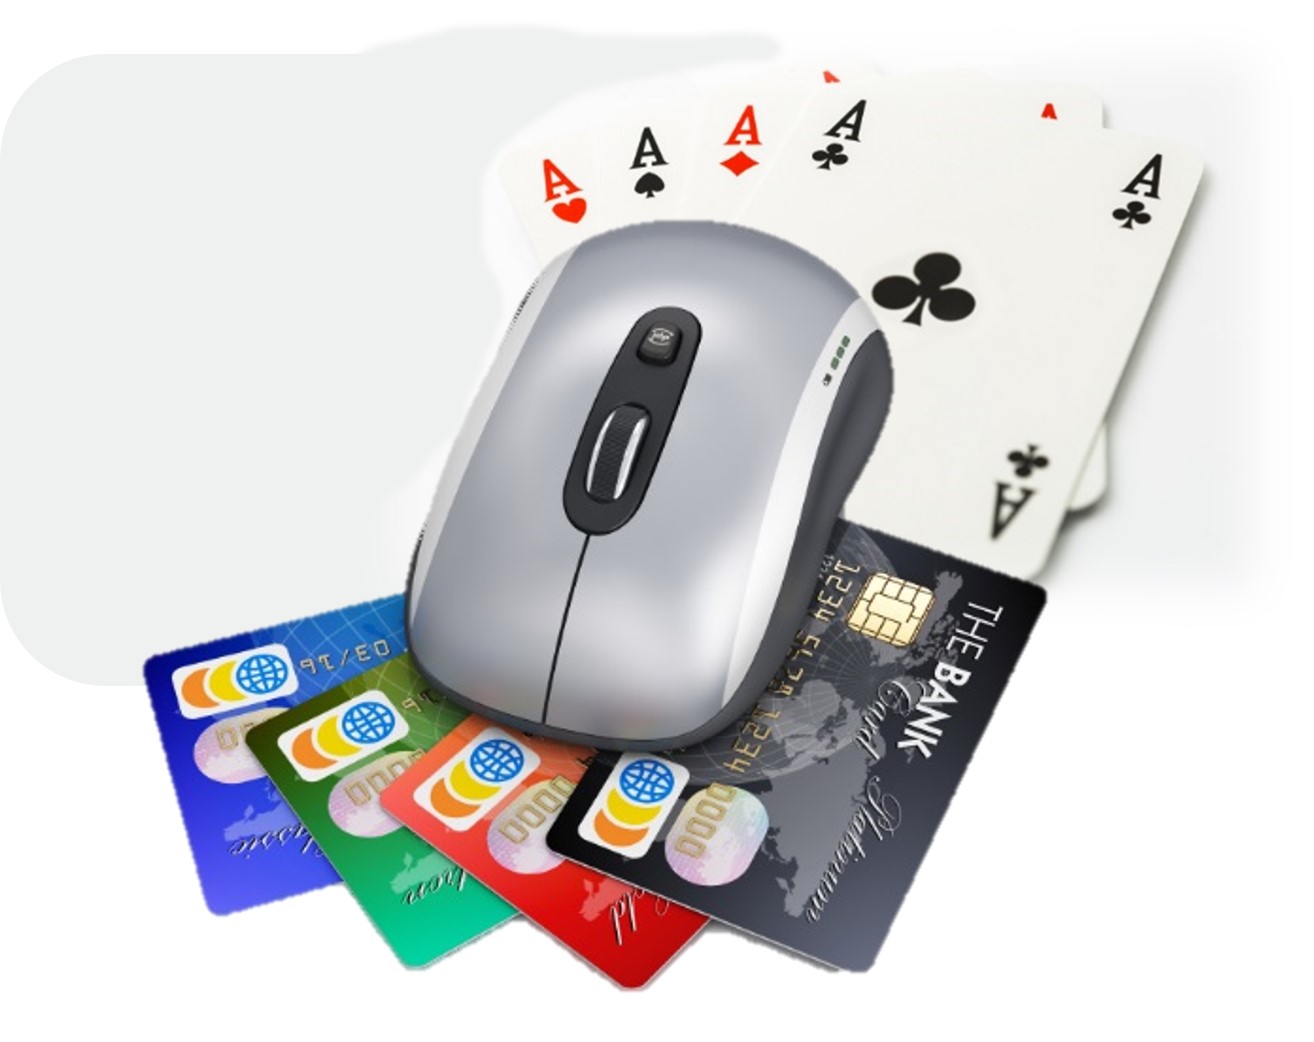 Online Poker: A New Way to Bank?